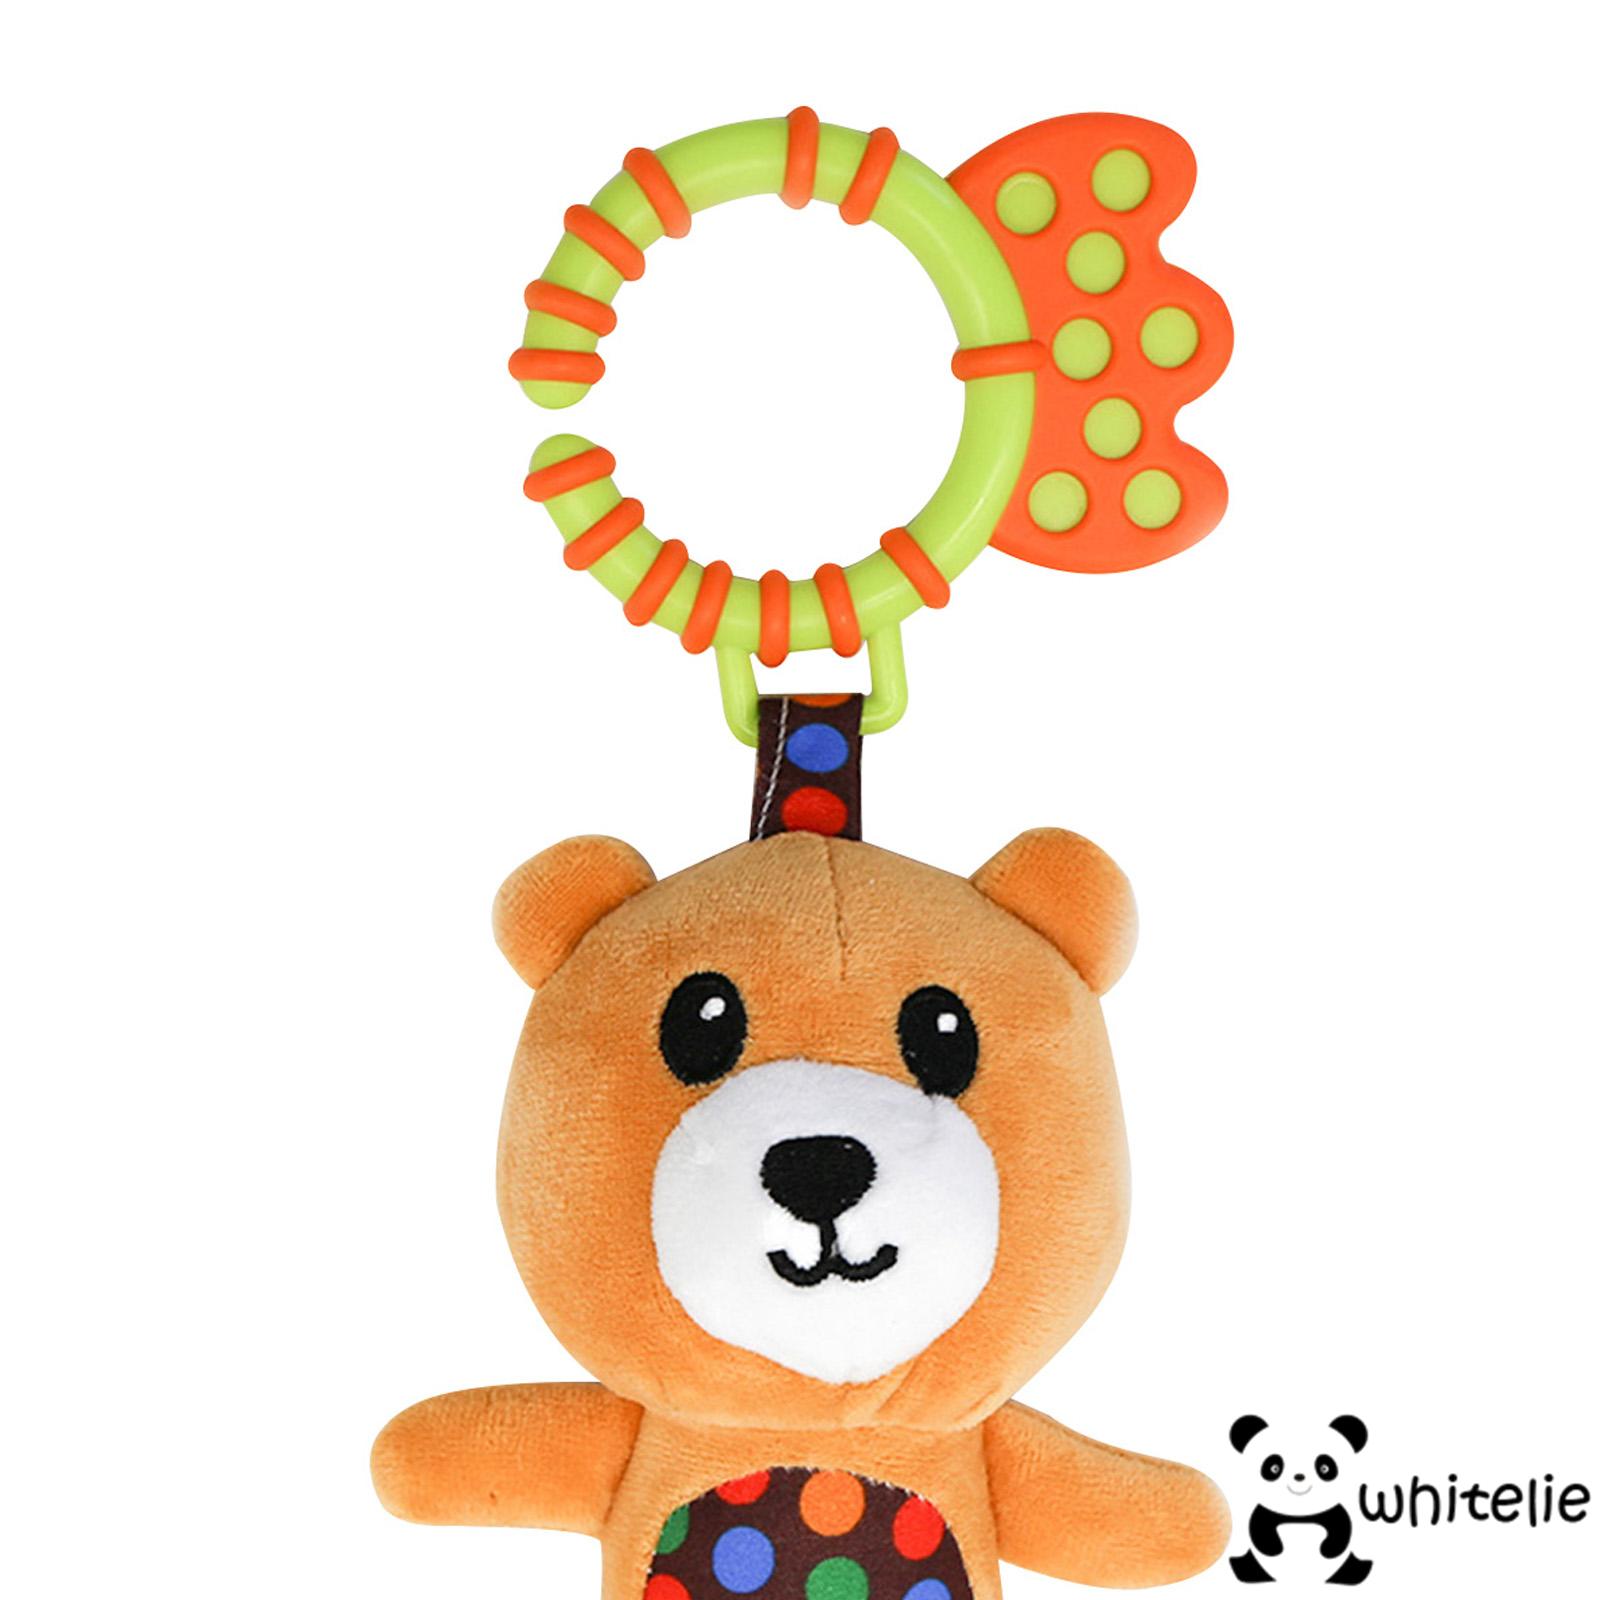 We-Baby Hanging Toys Stuffed Animal with C-Clip Ring Activity Development Toy for Crib Stroller Carseat Decoration